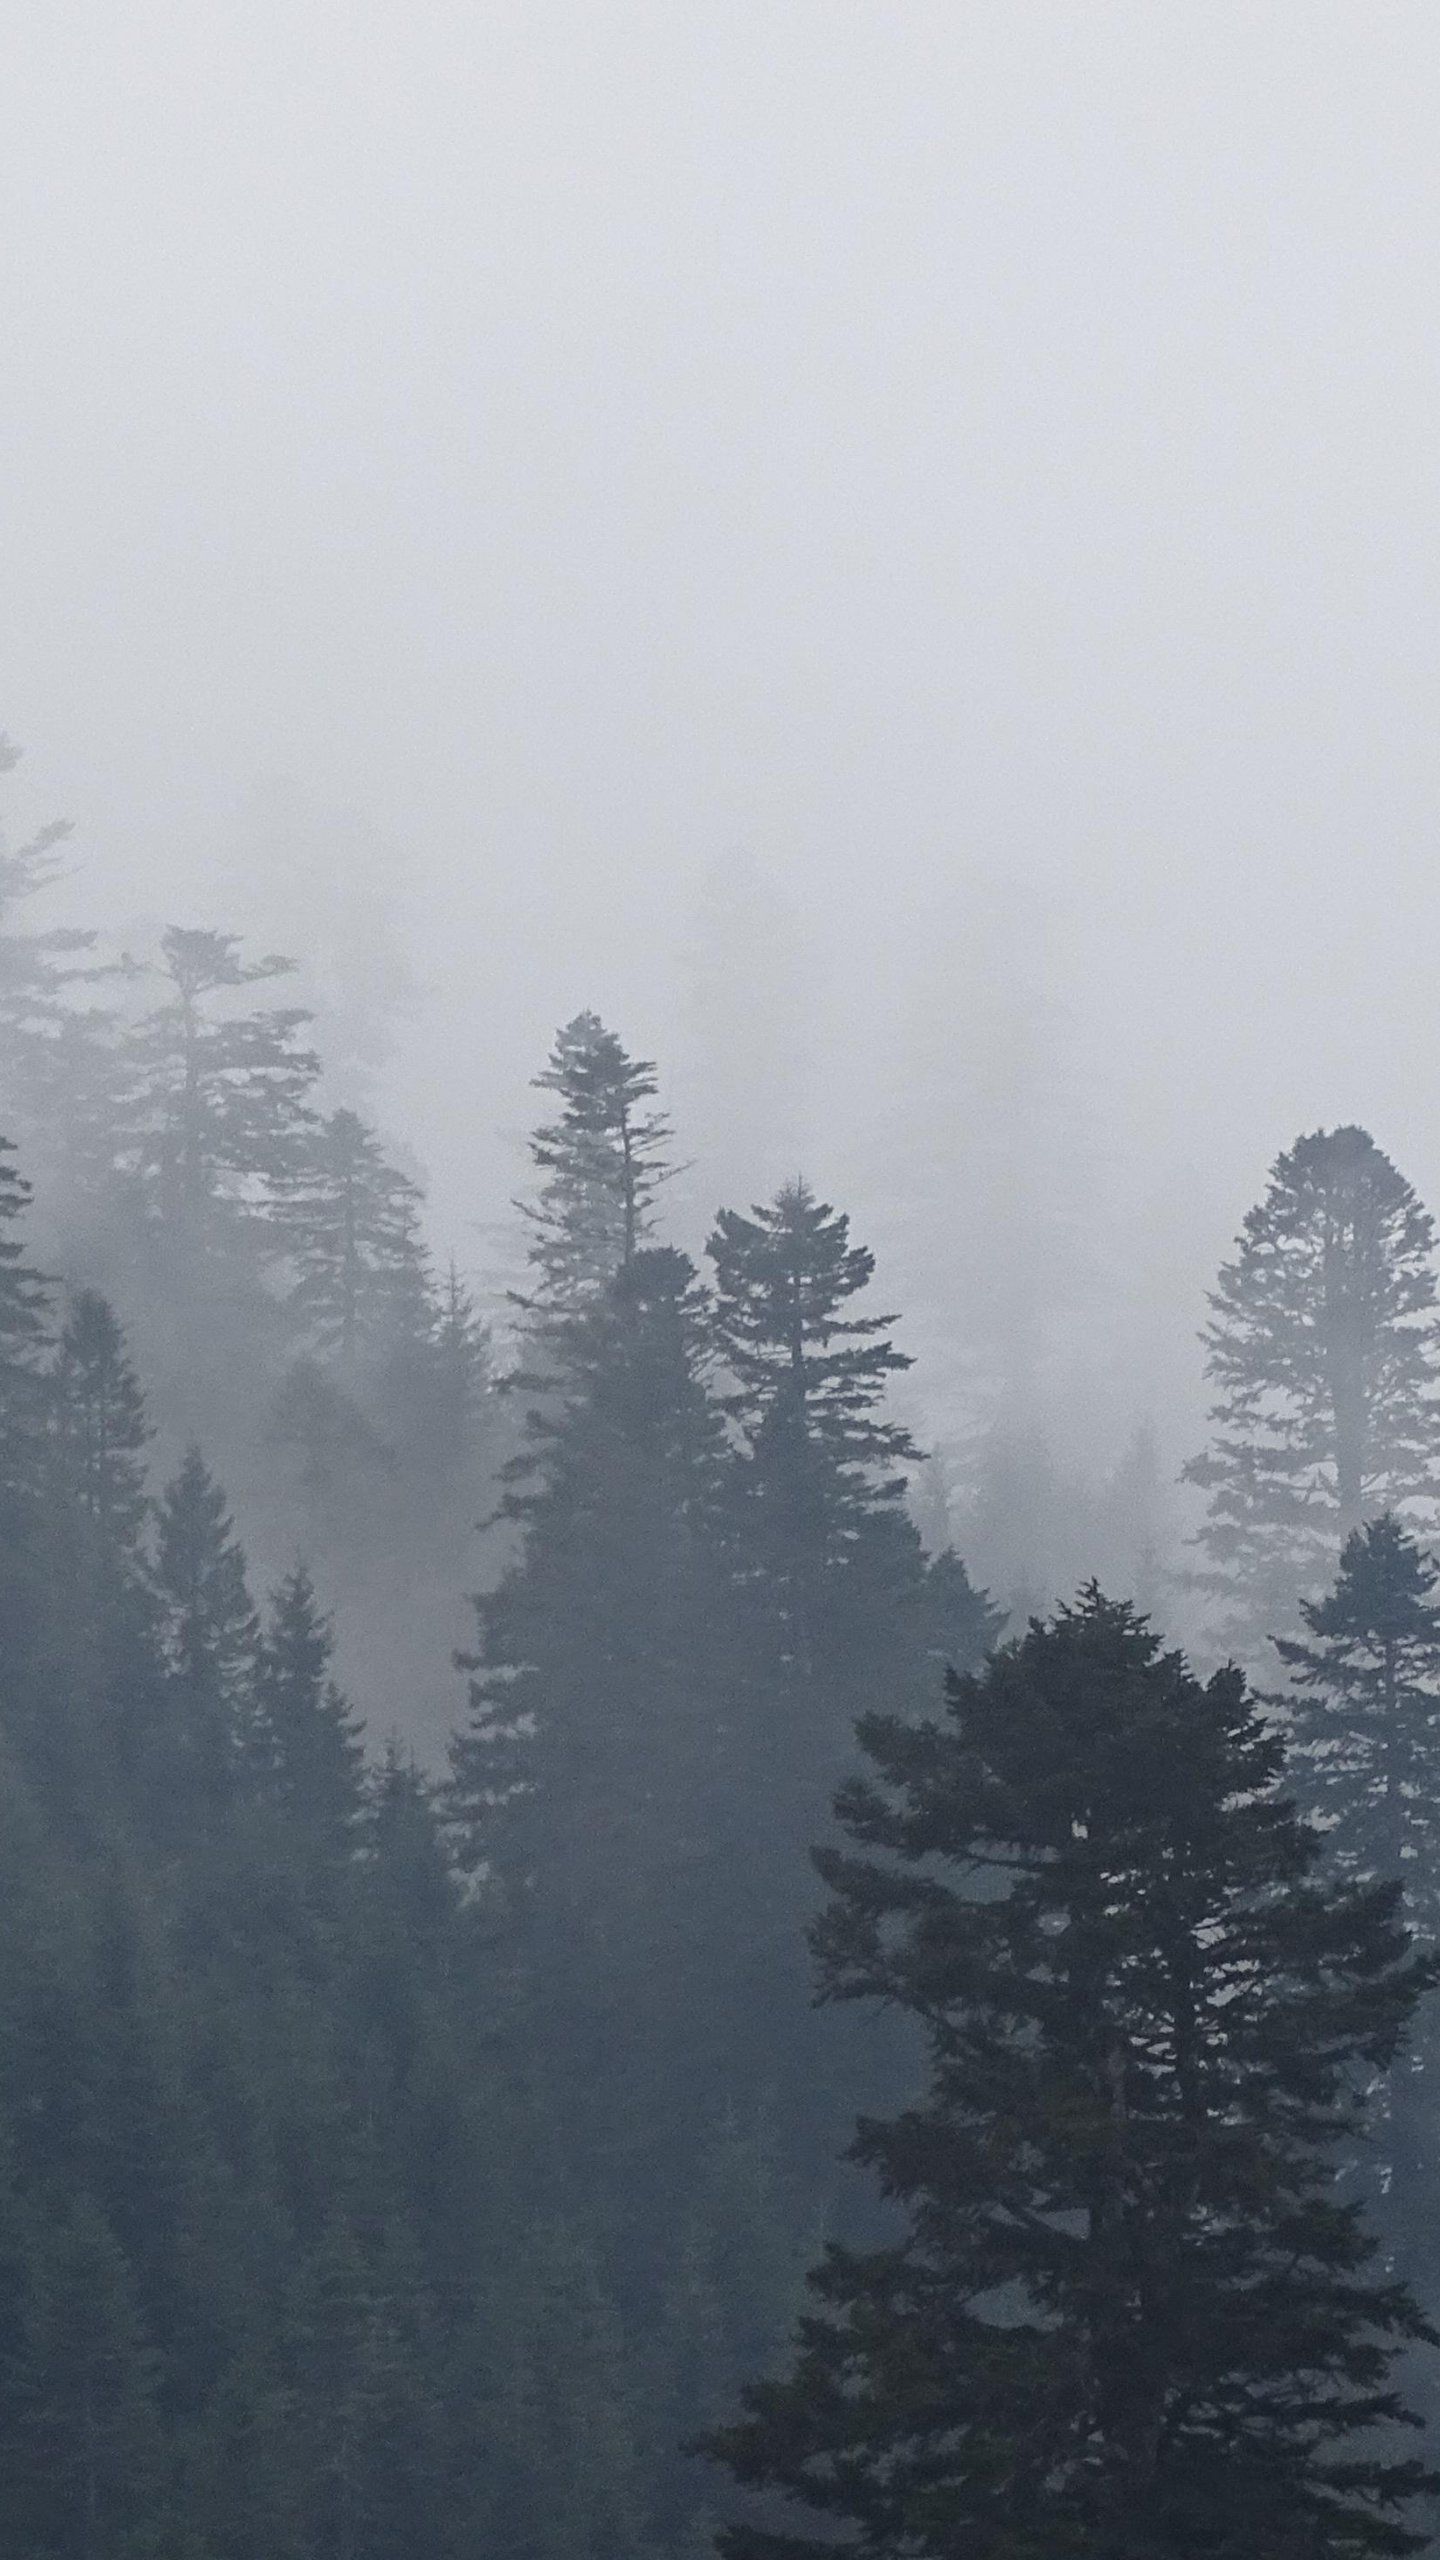 A foggy forest of evergreen trees. - Foggy forest